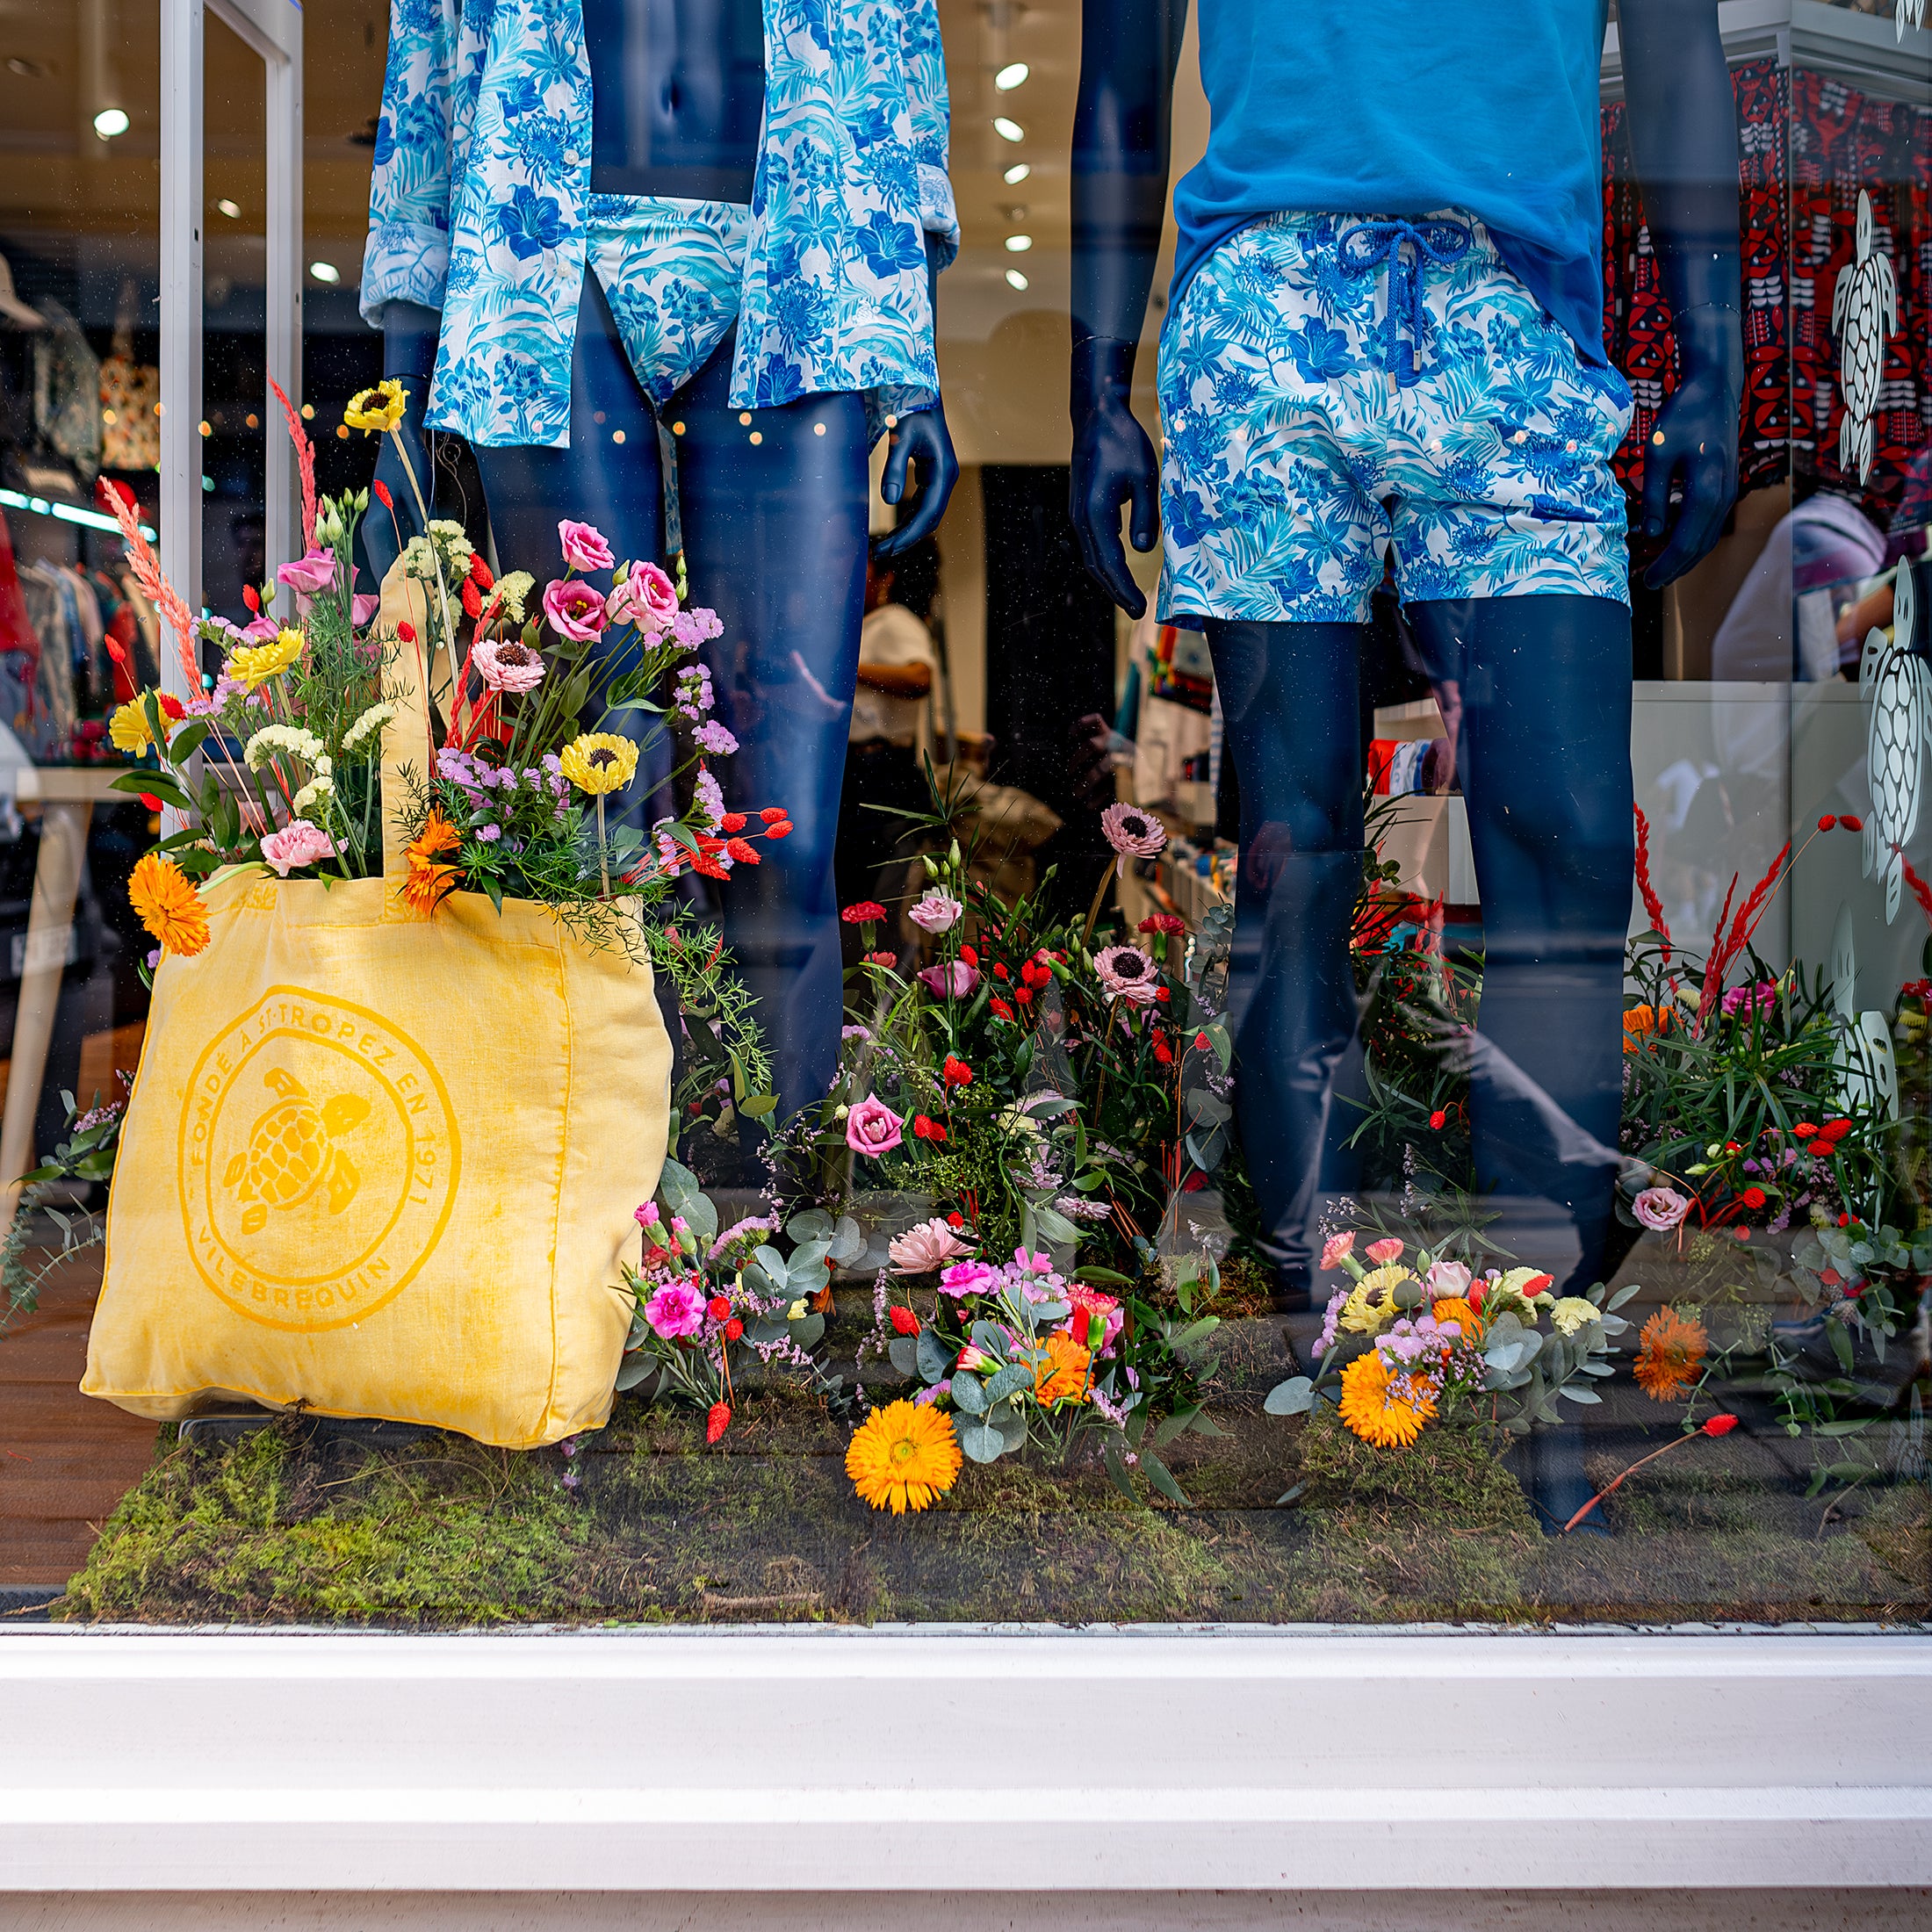 Vilebrequin store window beautifully decorated with colourful floral arrangements by Amaranté London for Chelsea in Bloom, featuring mannequins dressed in swimwear and lush greenery at the base - Amaranté London, Event Florist